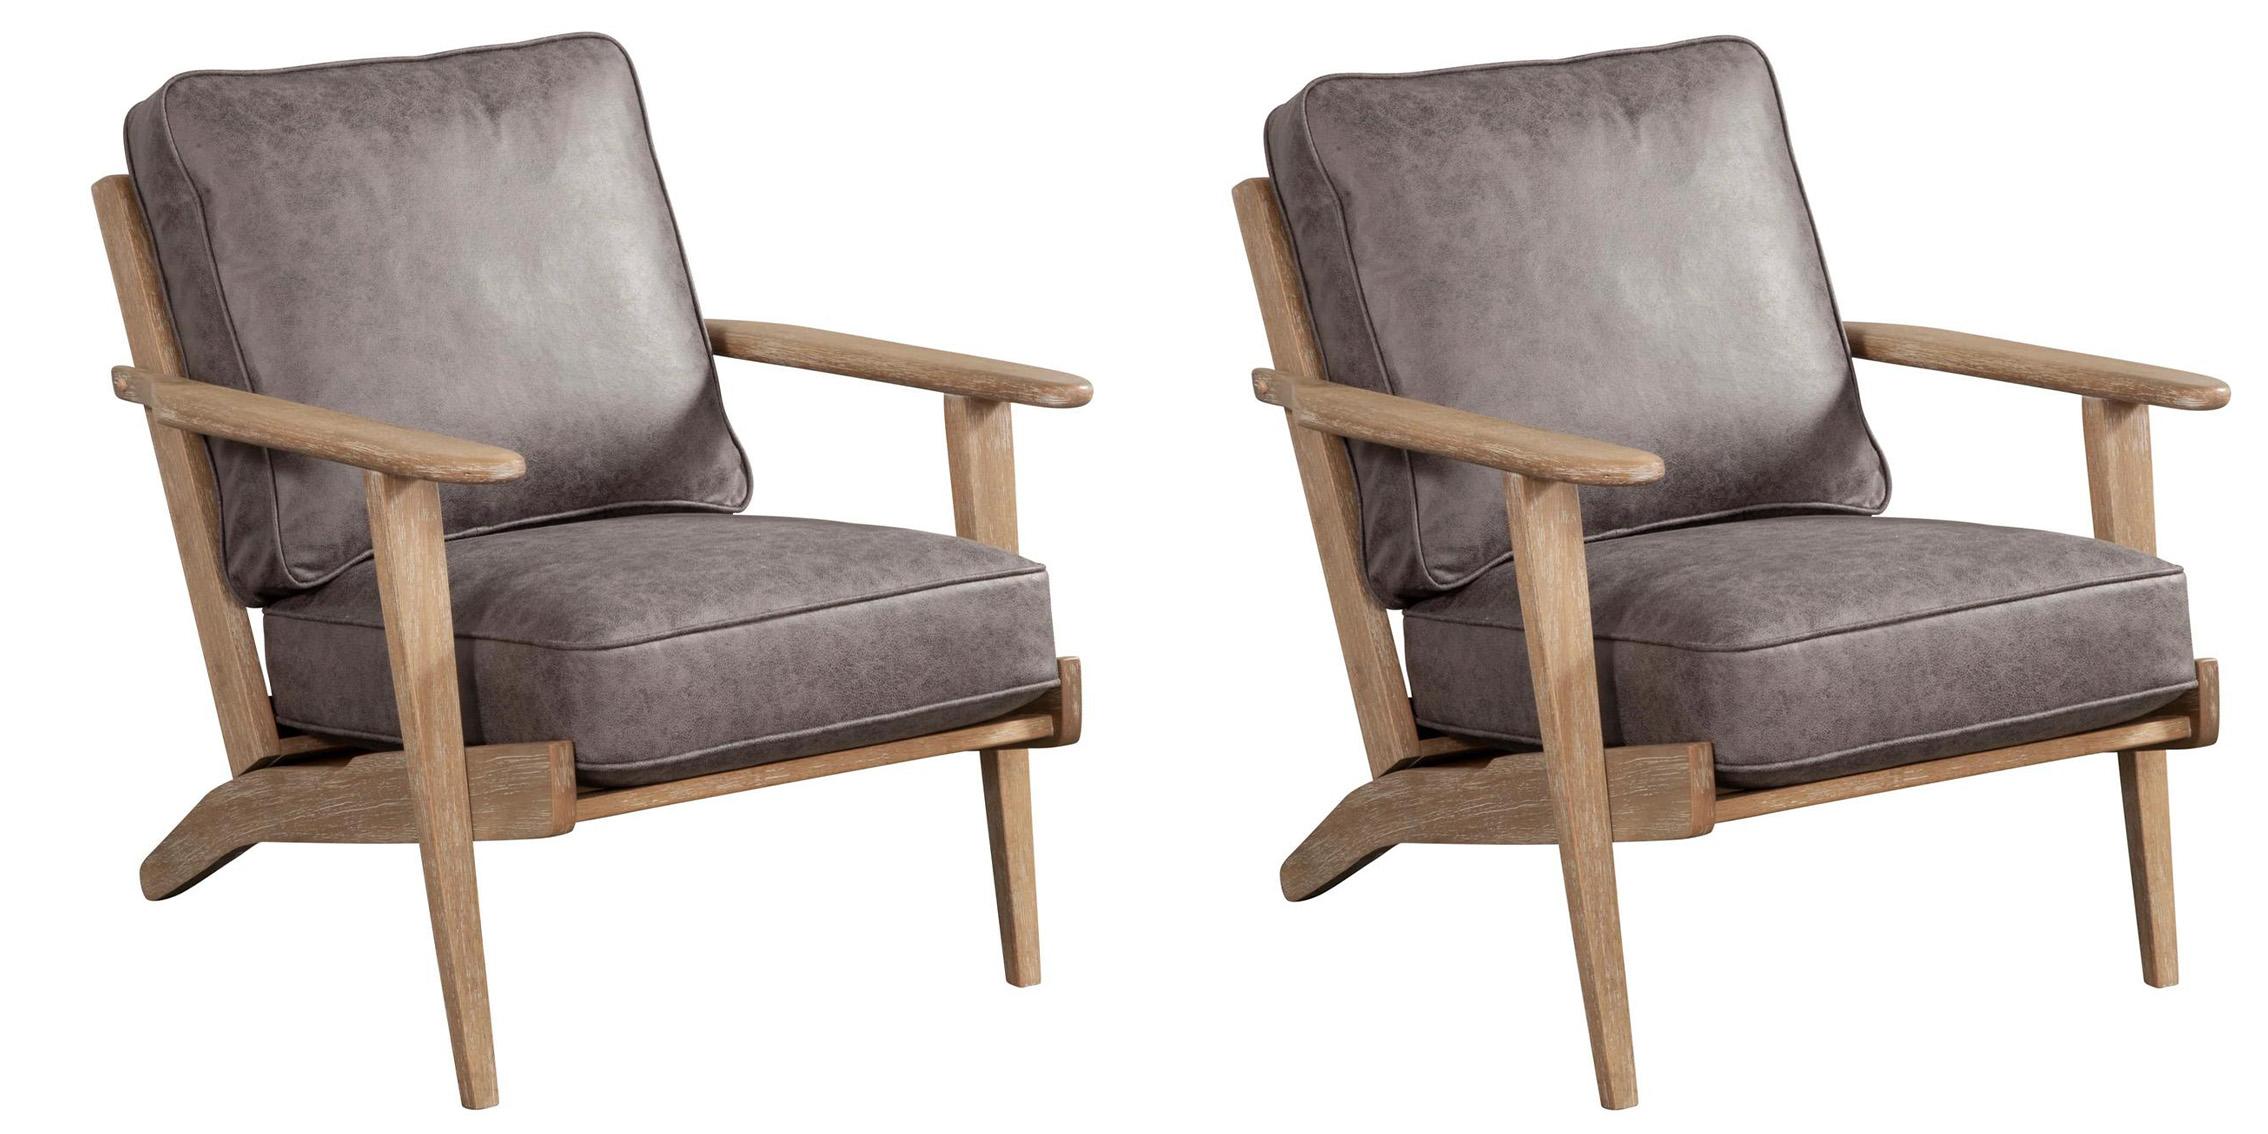 Contemporary, Modern Arm Chair Set ARTICA 9116-Set-2 in Dark Grey, Natural Faux Leather